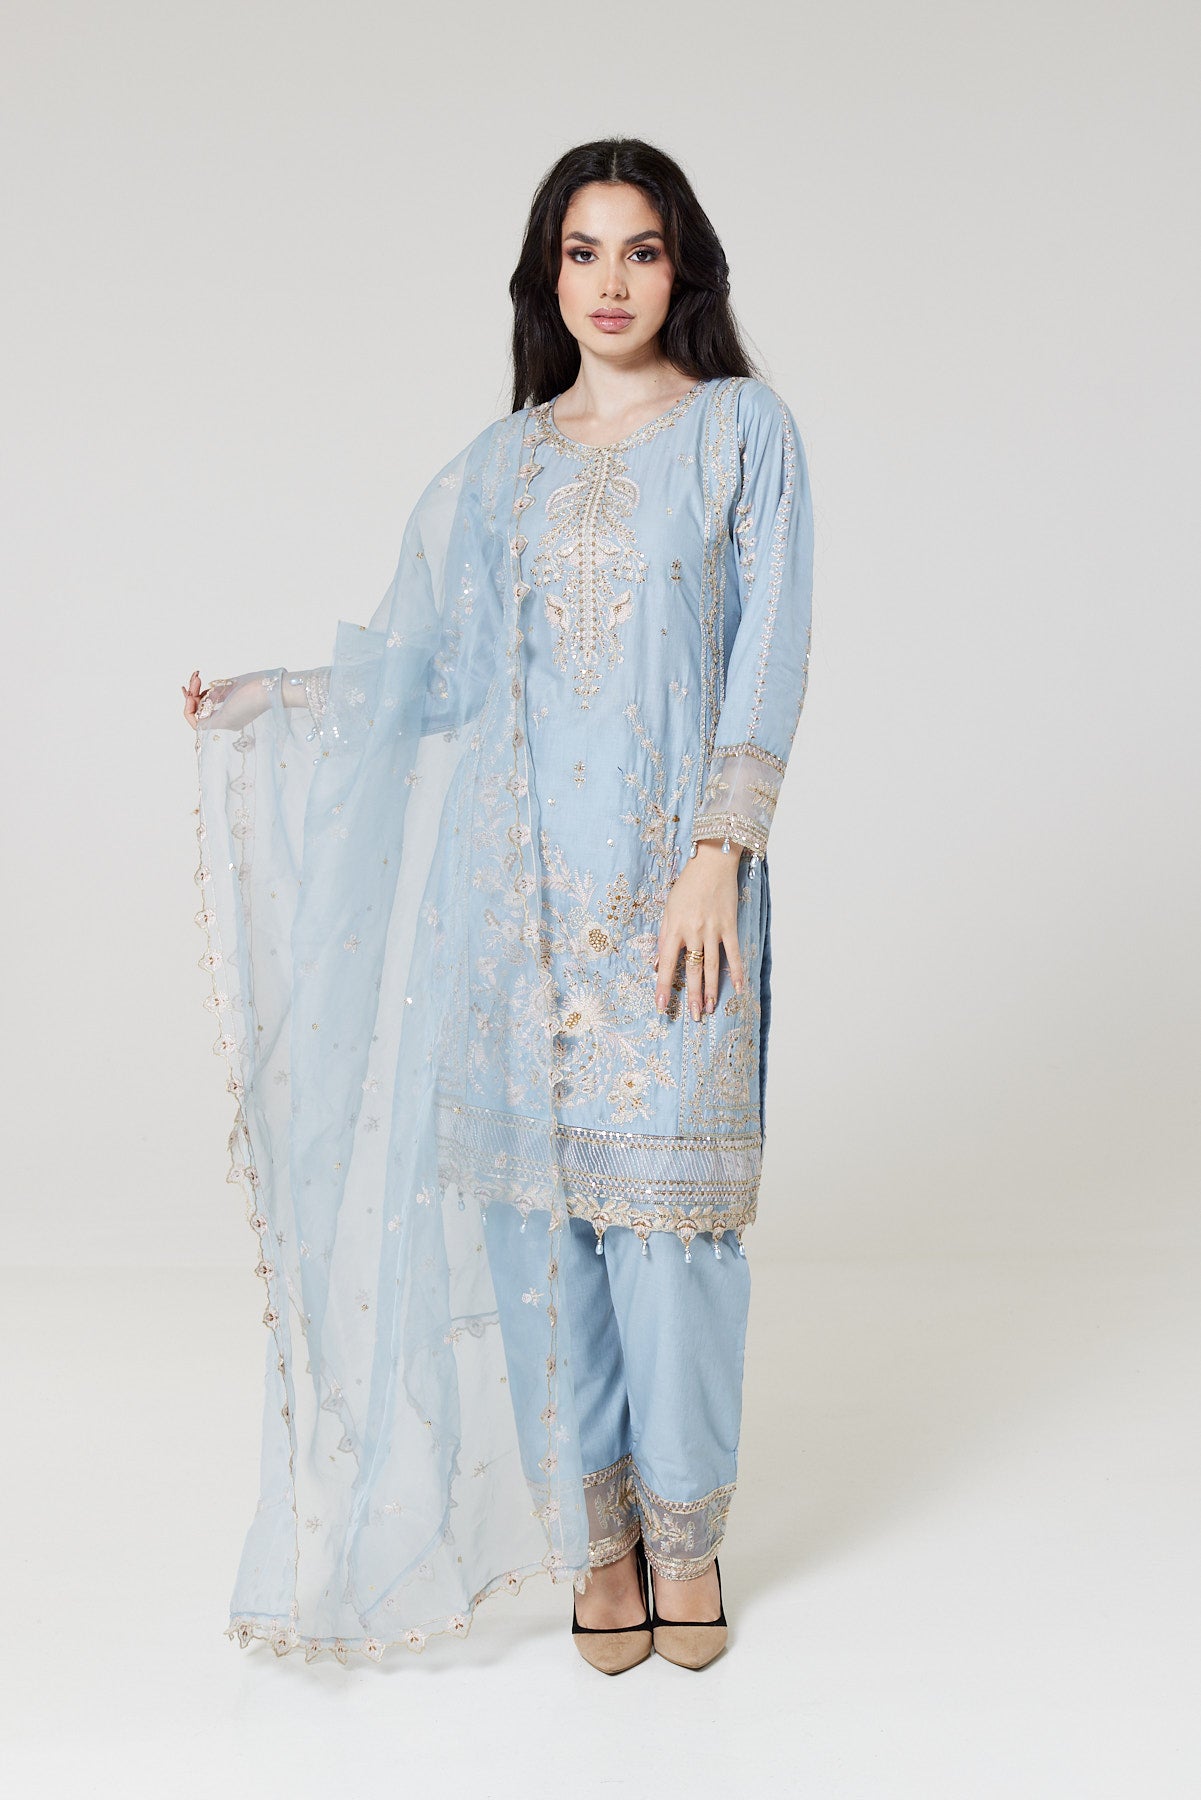 Sky blue Embroidered Cotton Suit SB0805